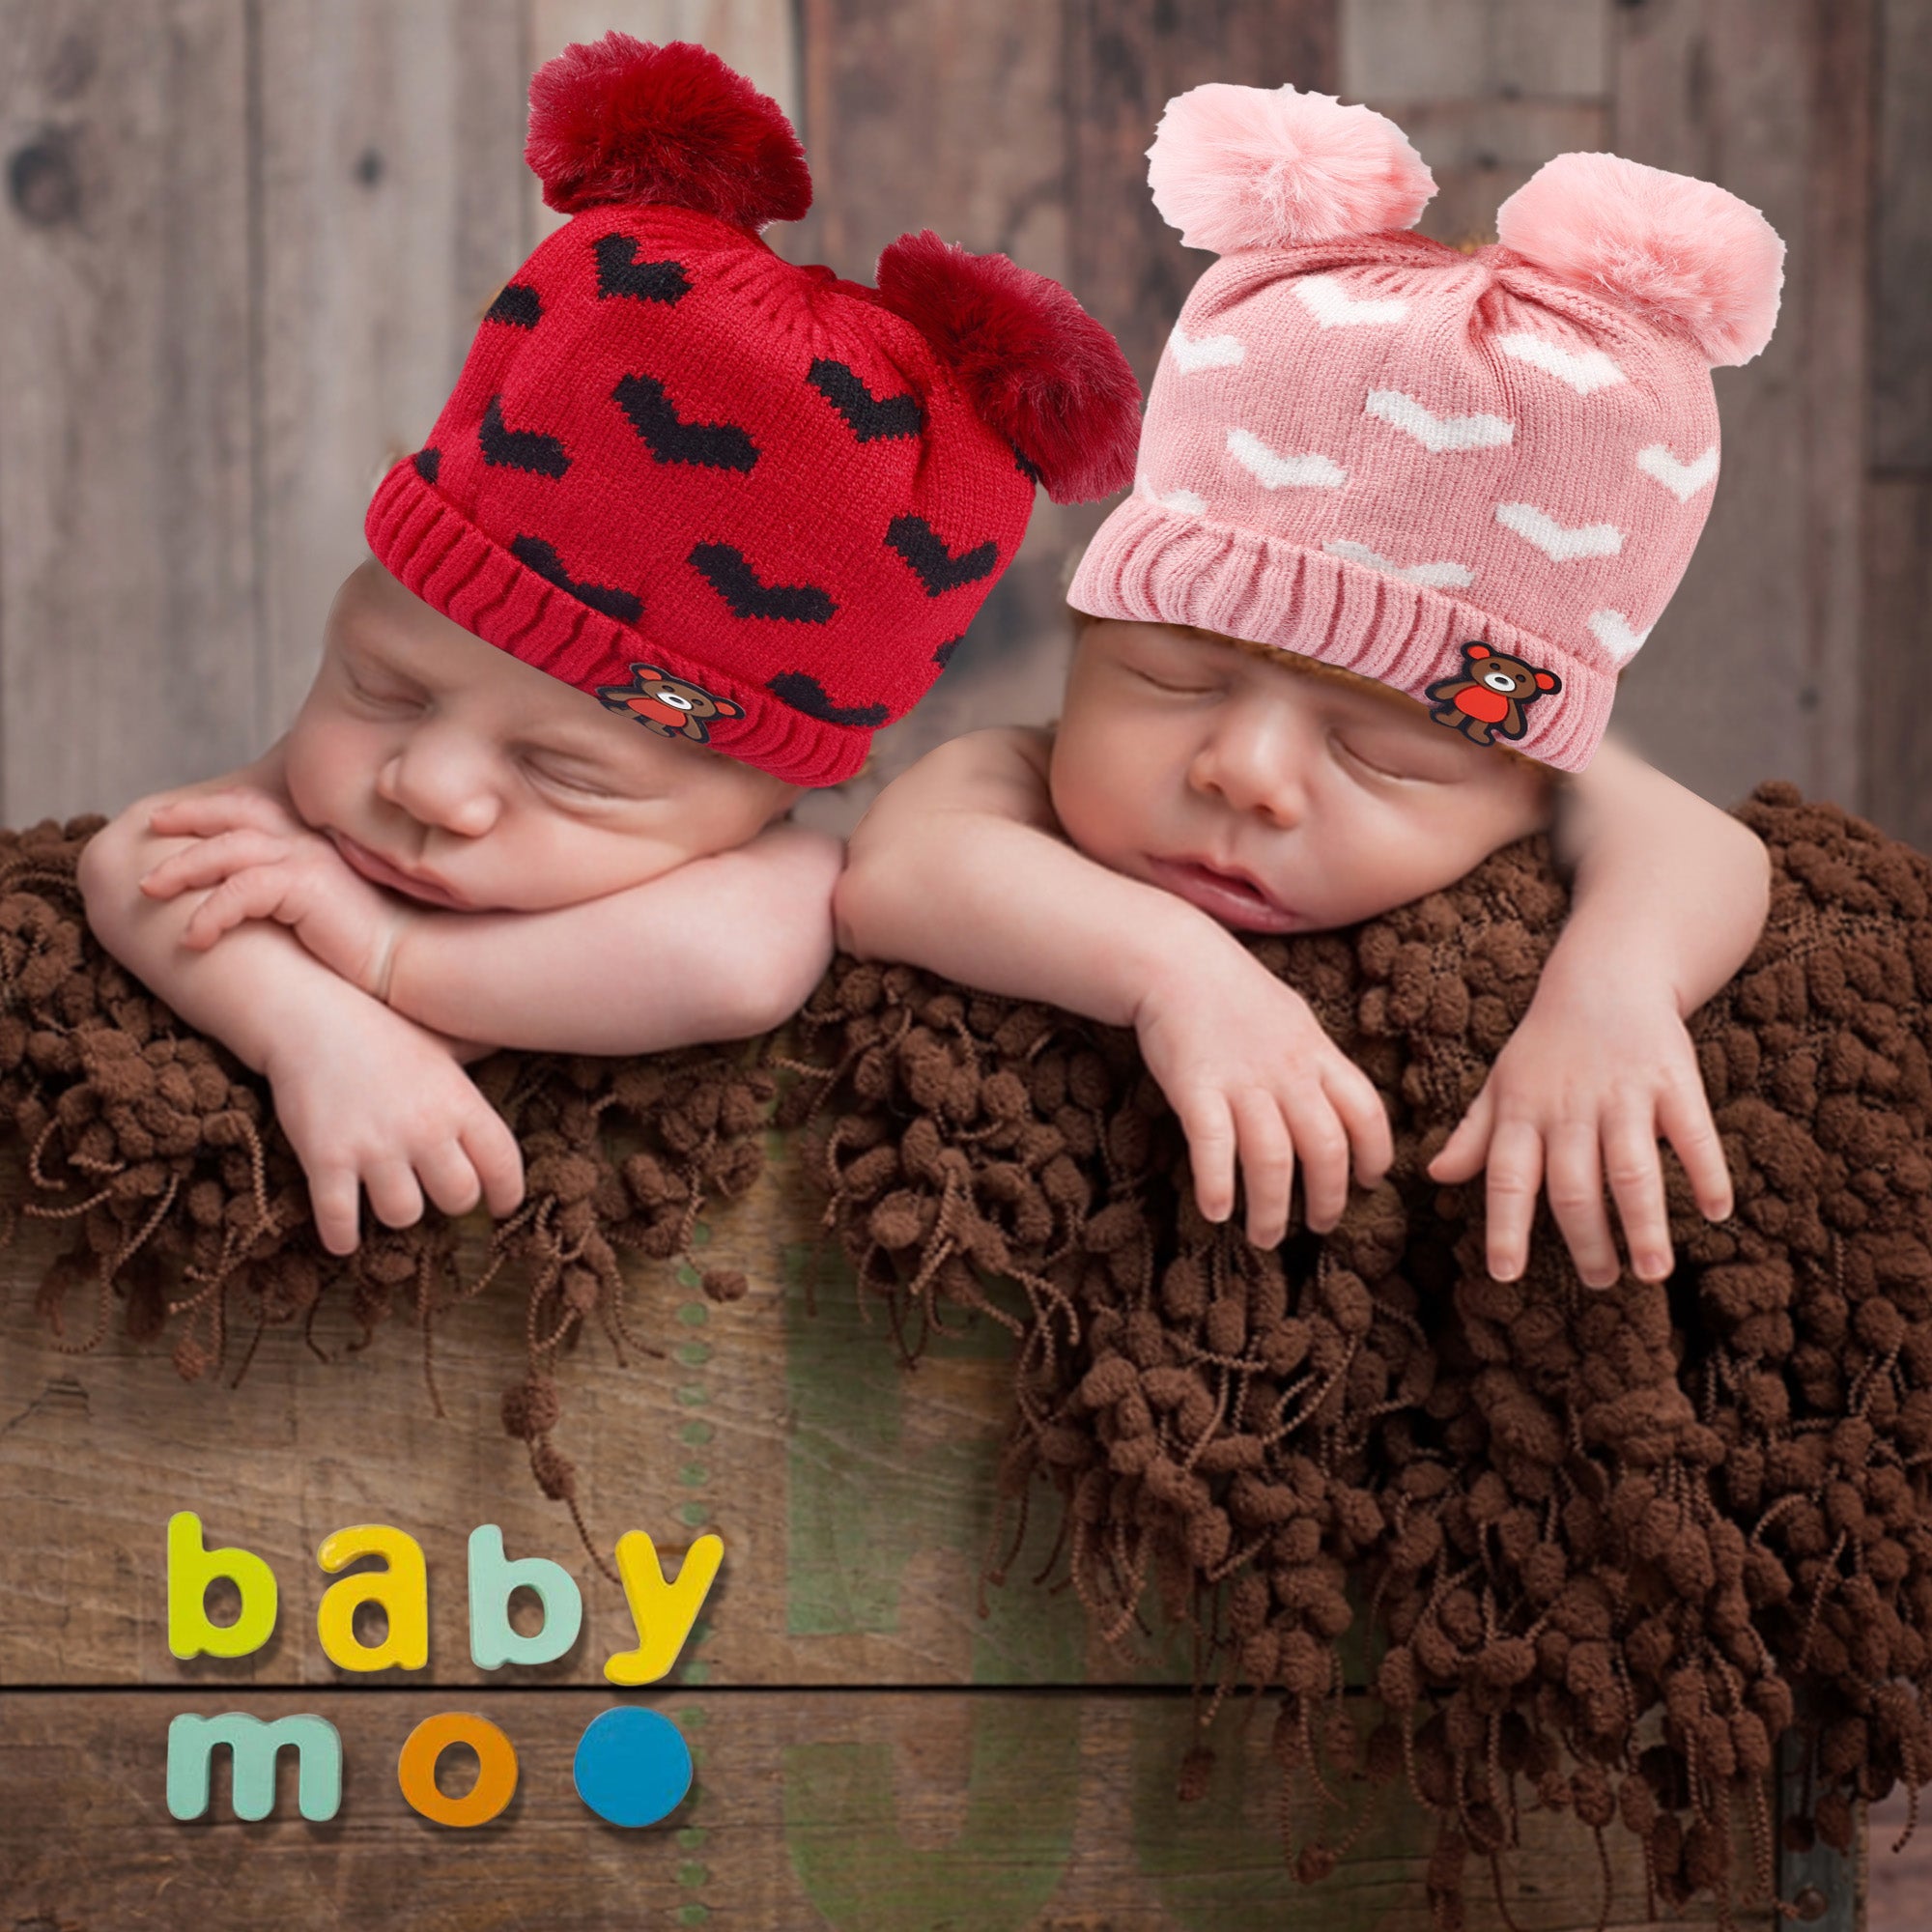 Baby Moo Pom Pom Hearts Red And Pink 2 Pk Woolen Cap